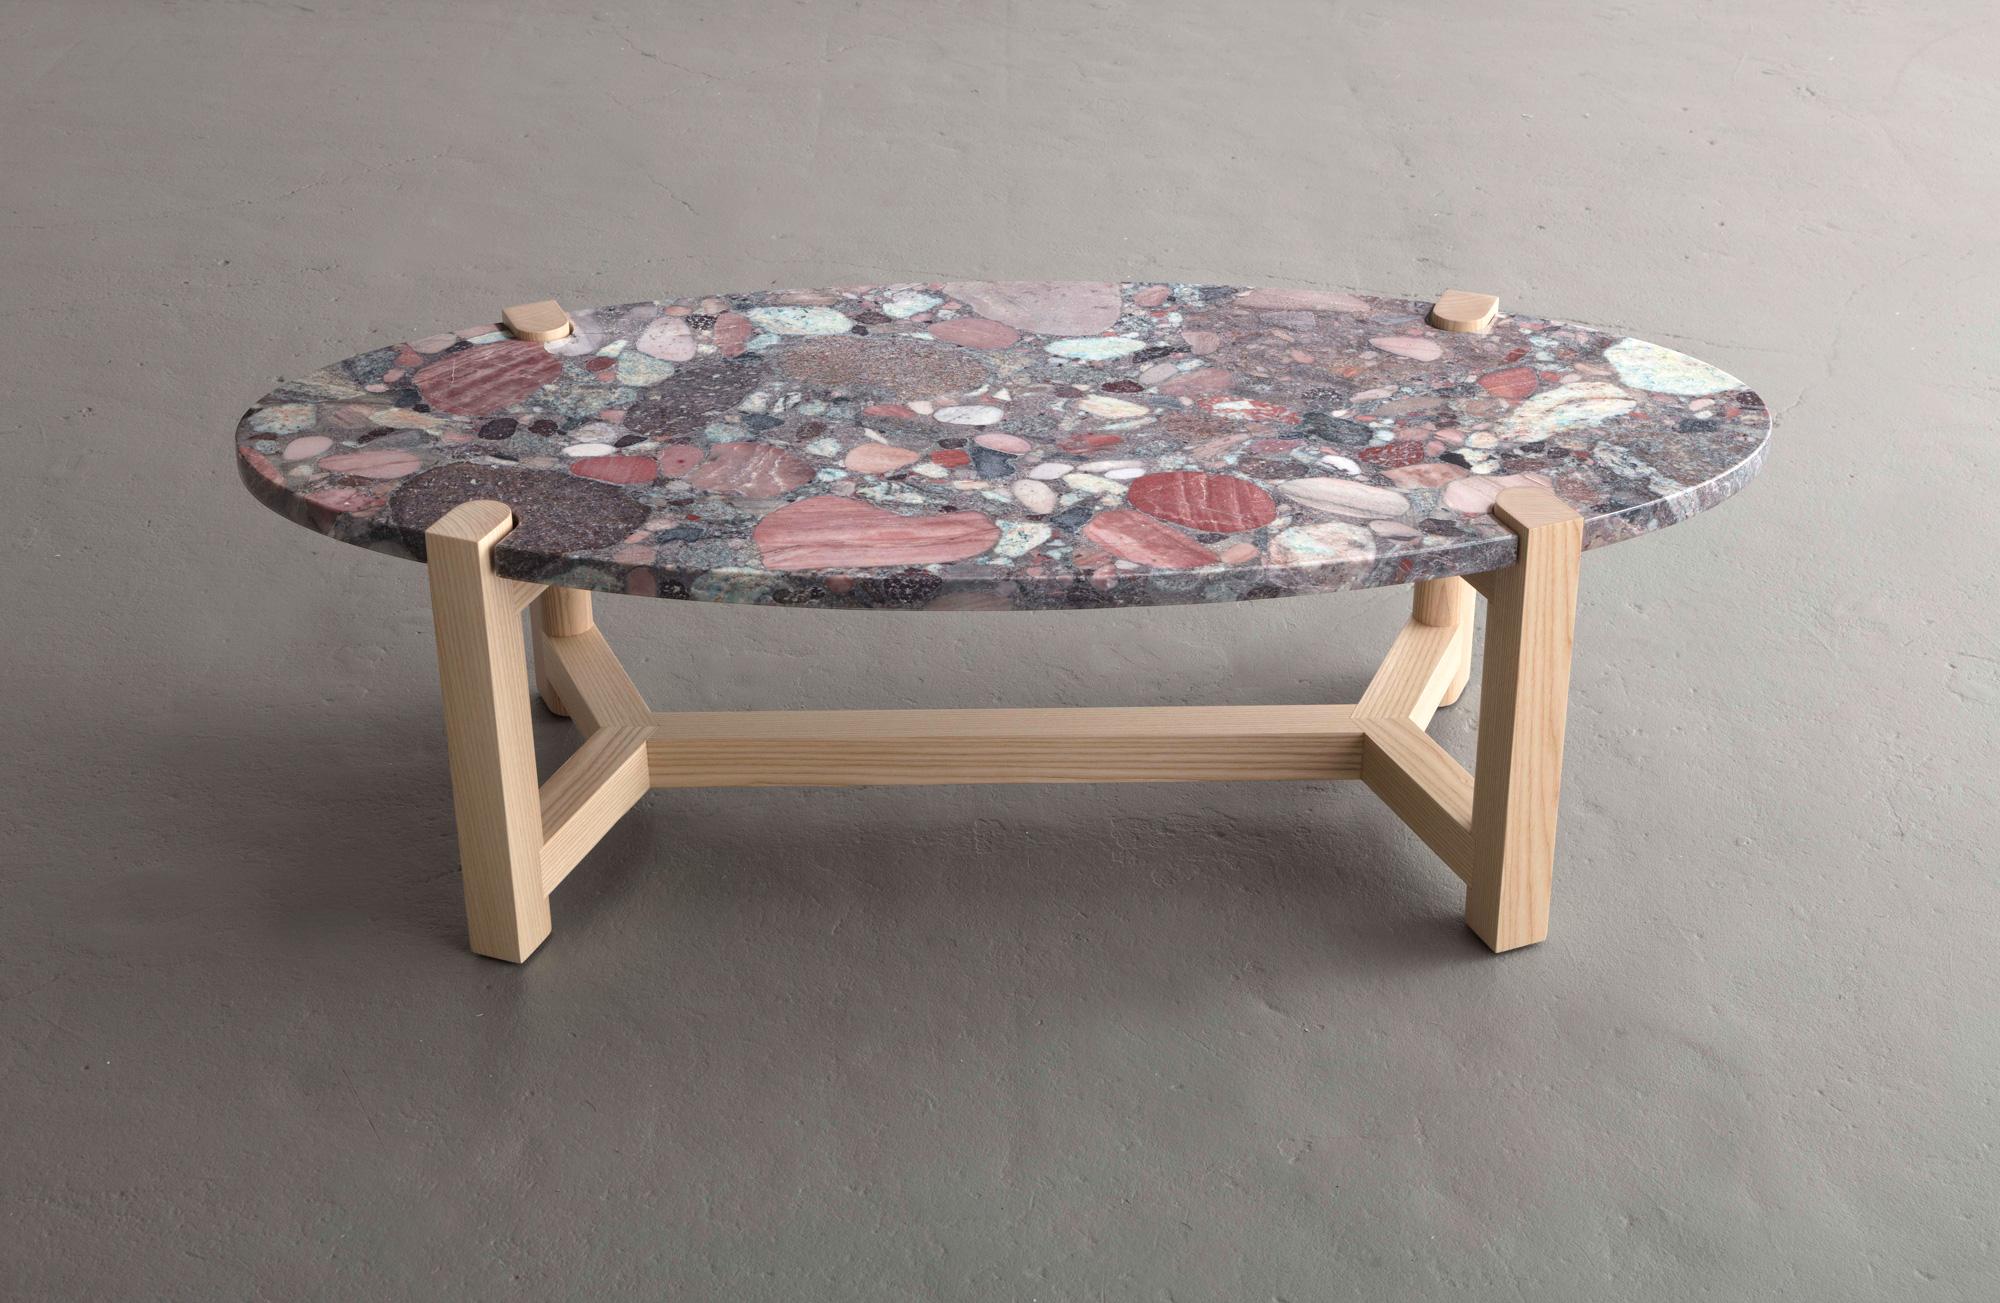 Pierce Coffee Table, Carrara Marble, Oval, Ash Hardwood In New Condition In Brooklyn, NY